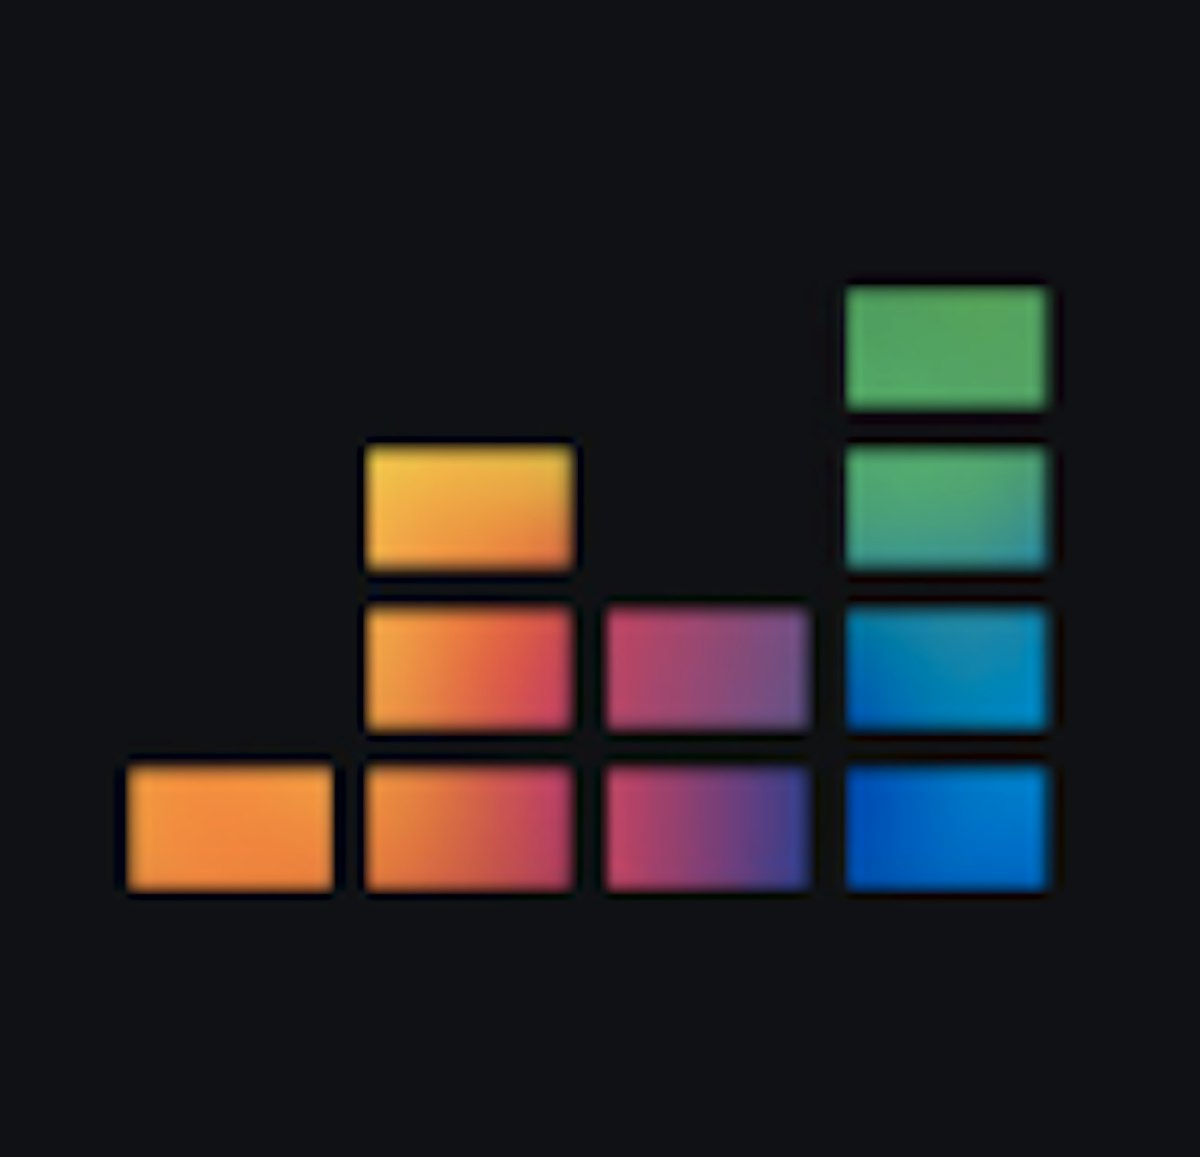 The three variations of Deezer icon that were tested